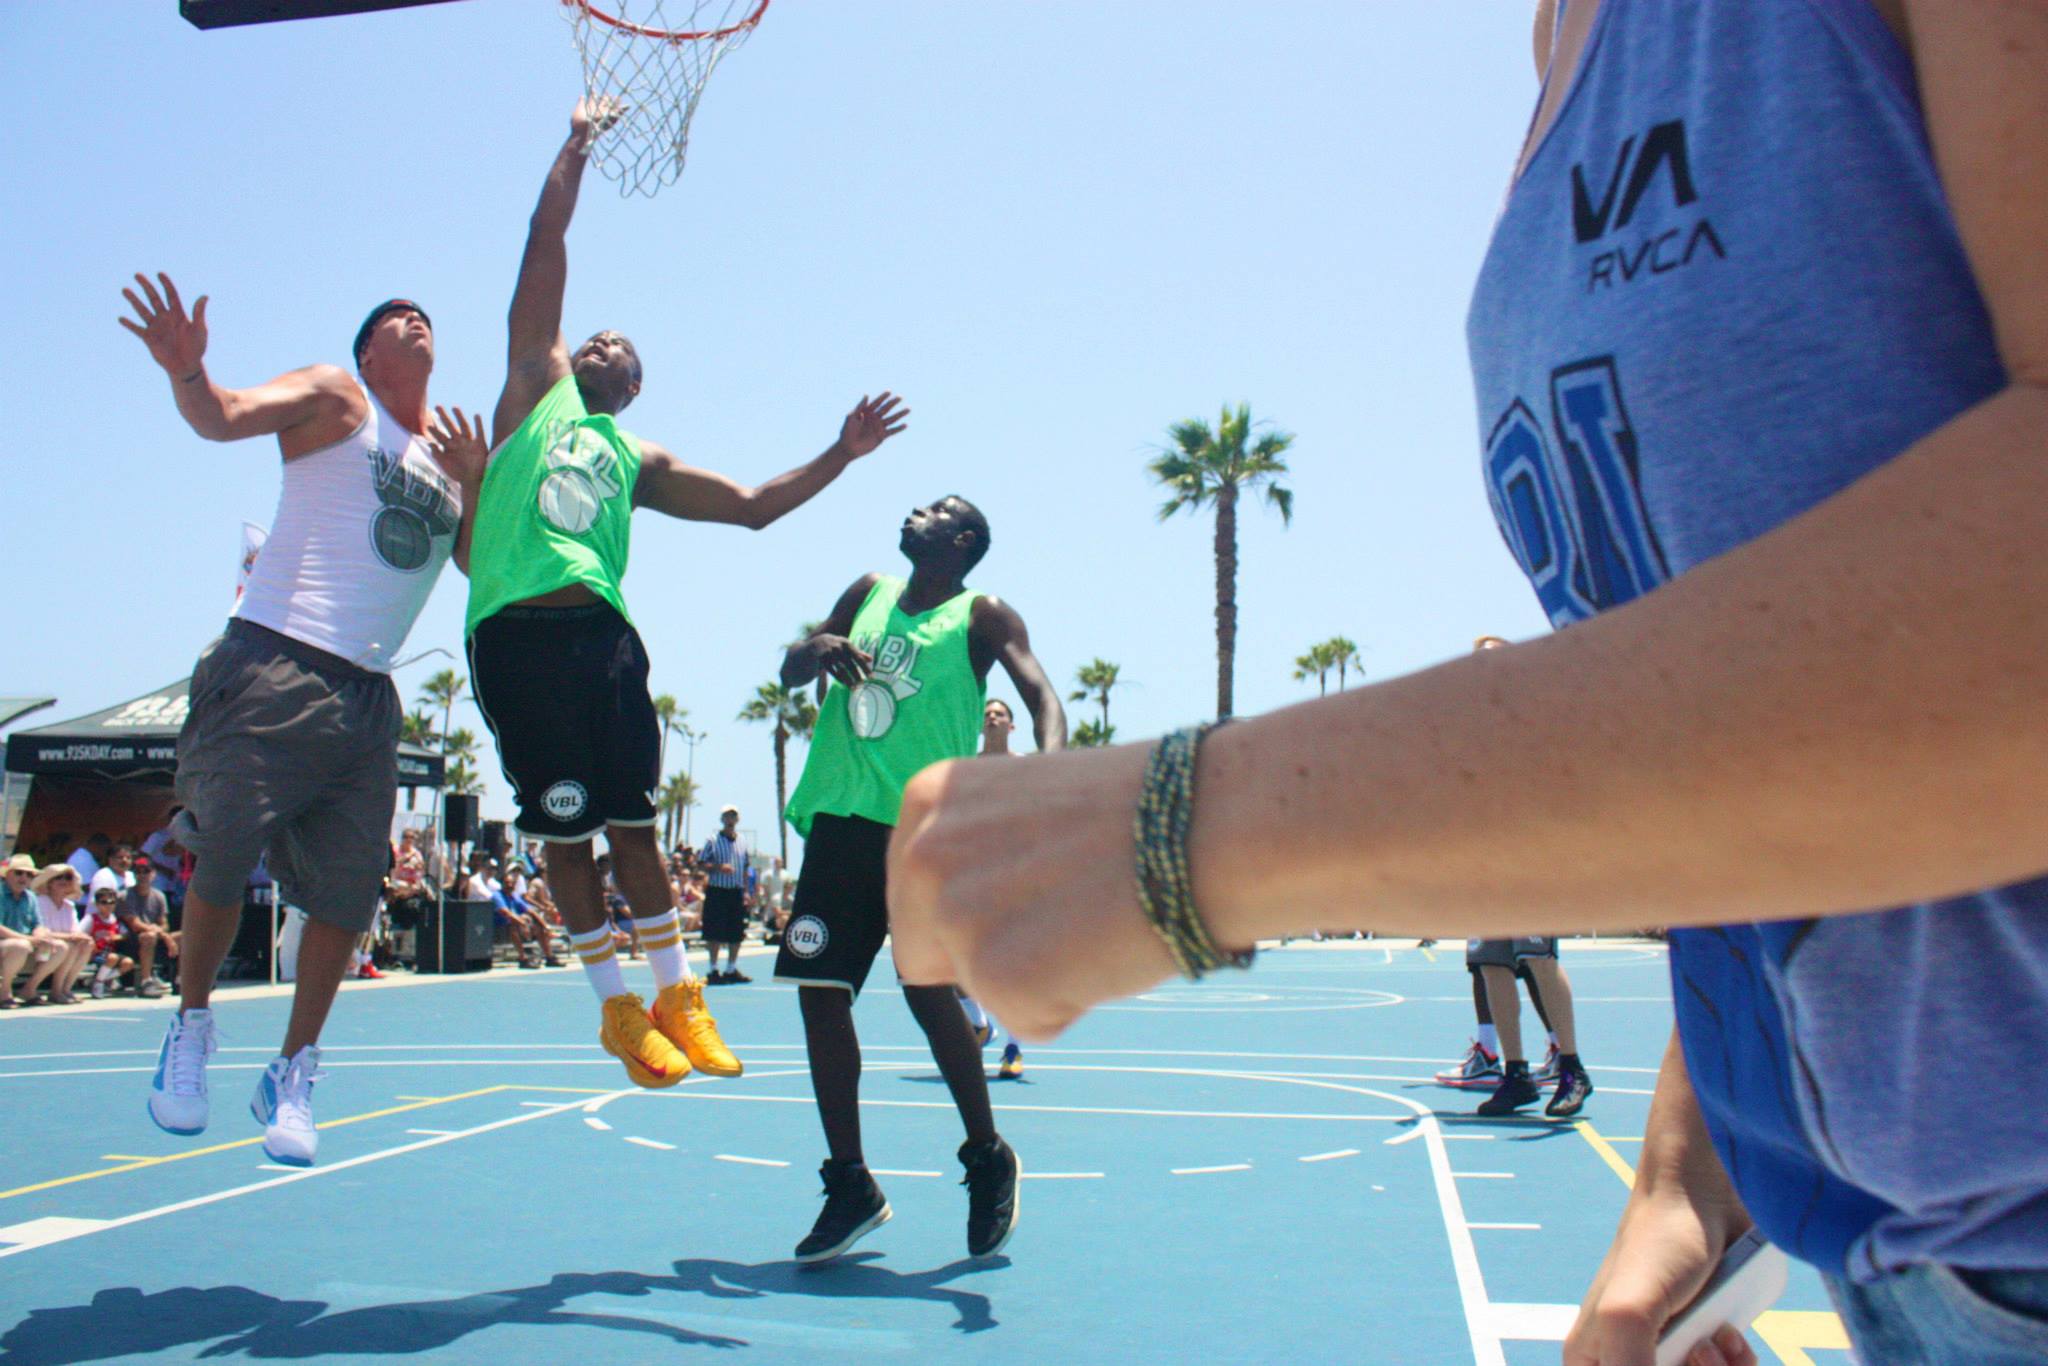 Best Shots from Week 5 at #TheVBL > Nothing like it!